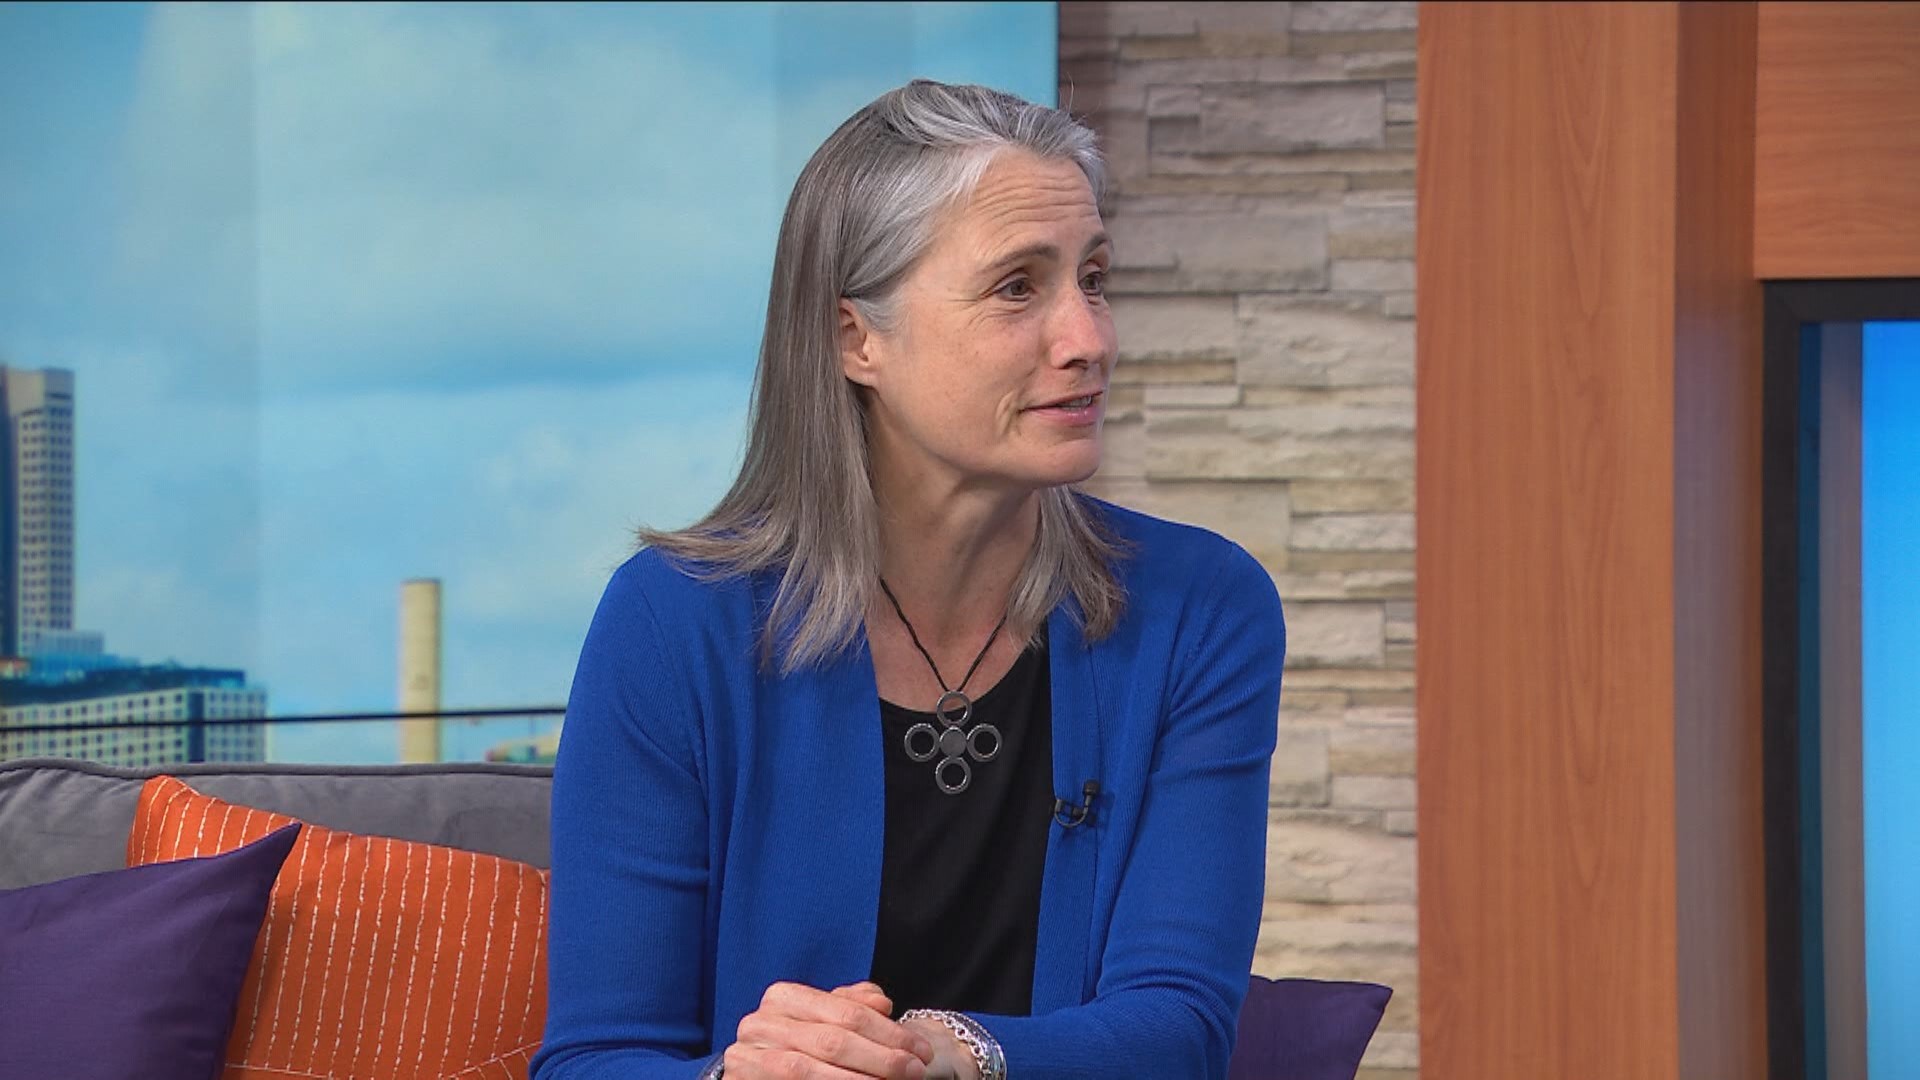 Former Deputy Assistant to the President Fiona Hill spoke with KARE 11 about the current state of global affairs ahead of a public speaking event in Minneapolis.